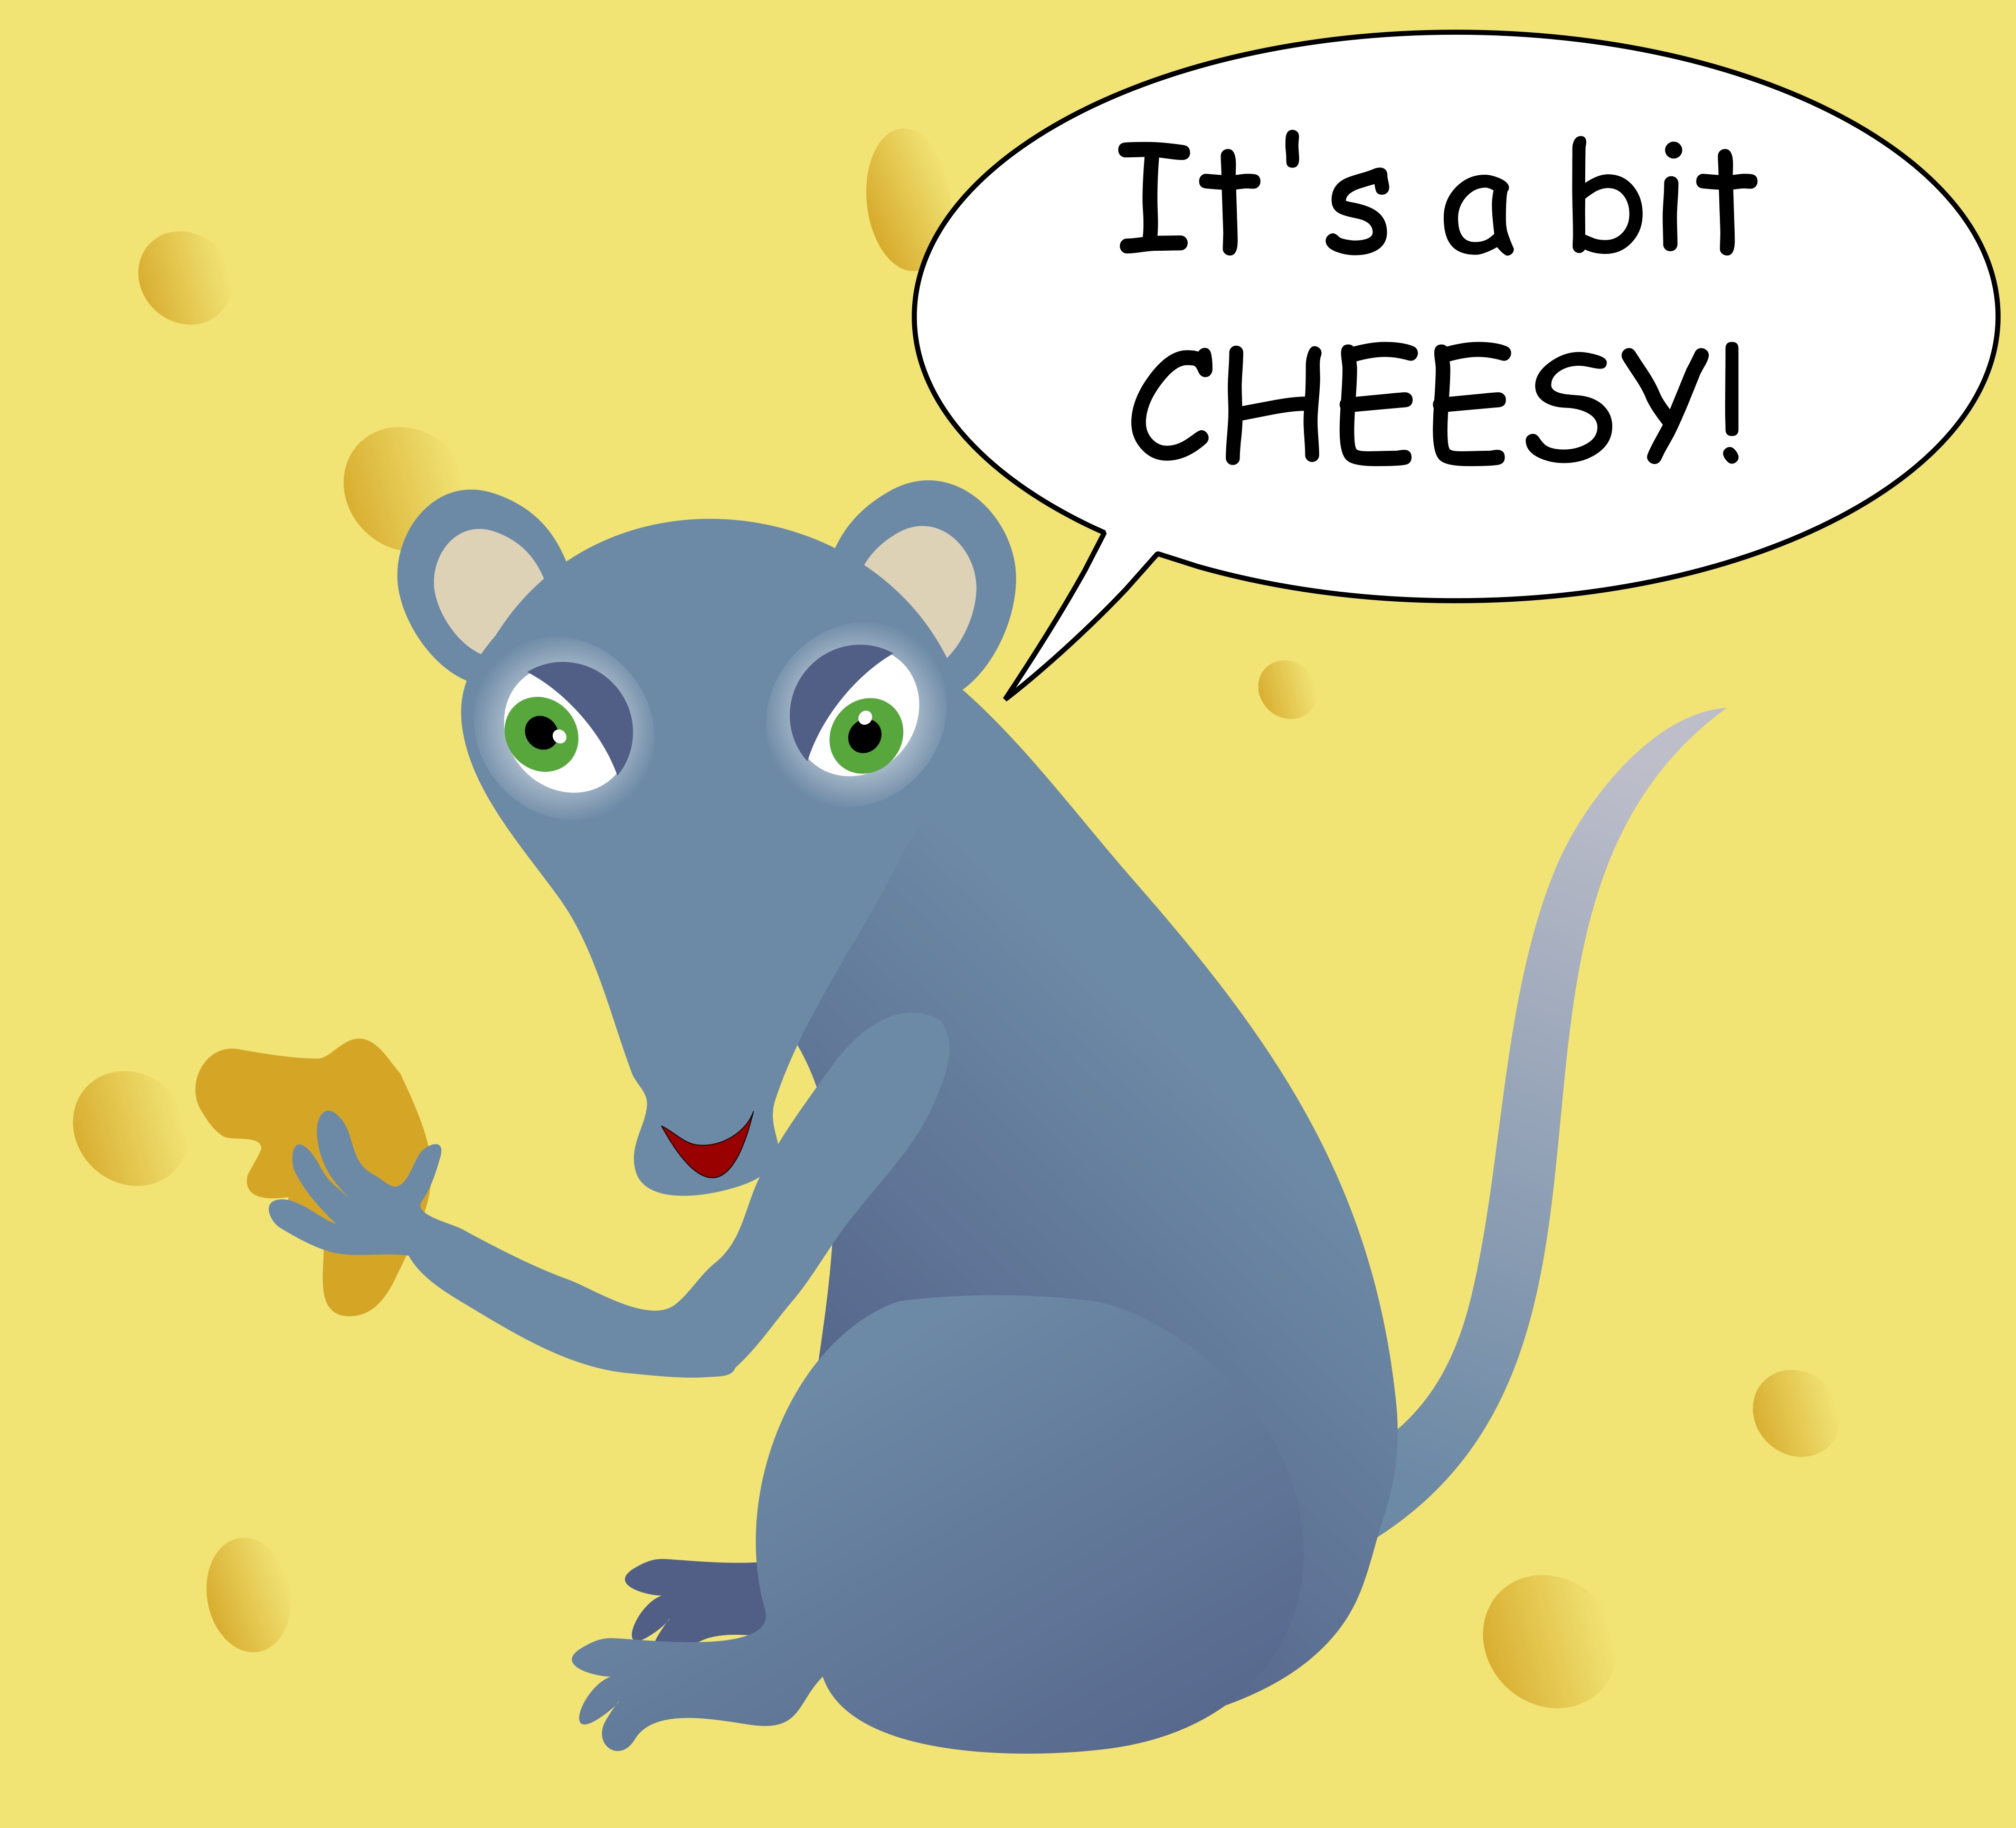 Cheesy Mouse Image   Vector Clip Art Online Royalty Free   Public